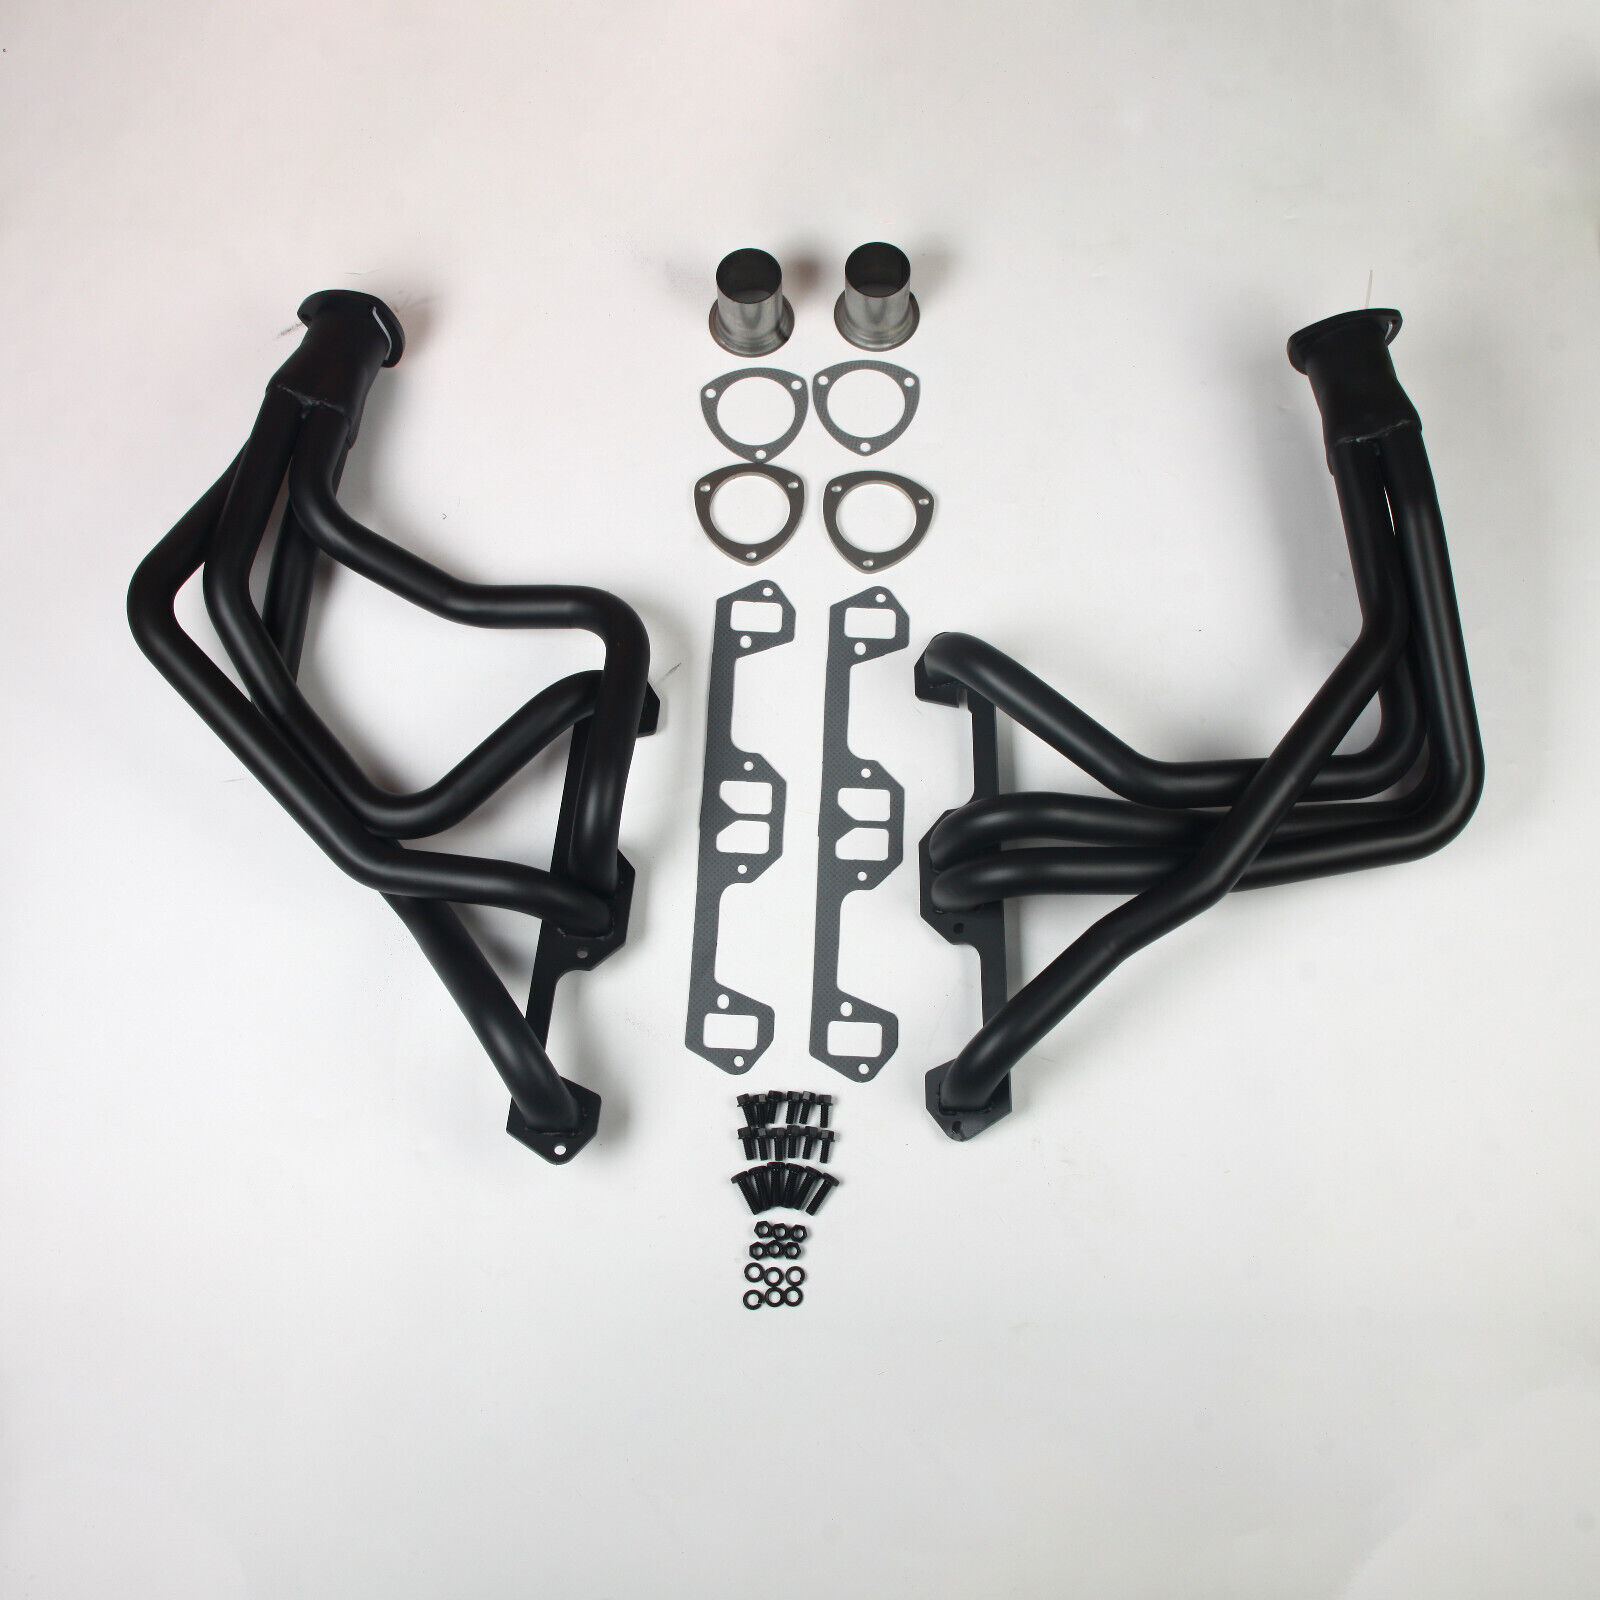 LONG TUBE HEADER Fits 72-74 Dodge D150 D250 W150  Plymouth 2WD & 4WD Black